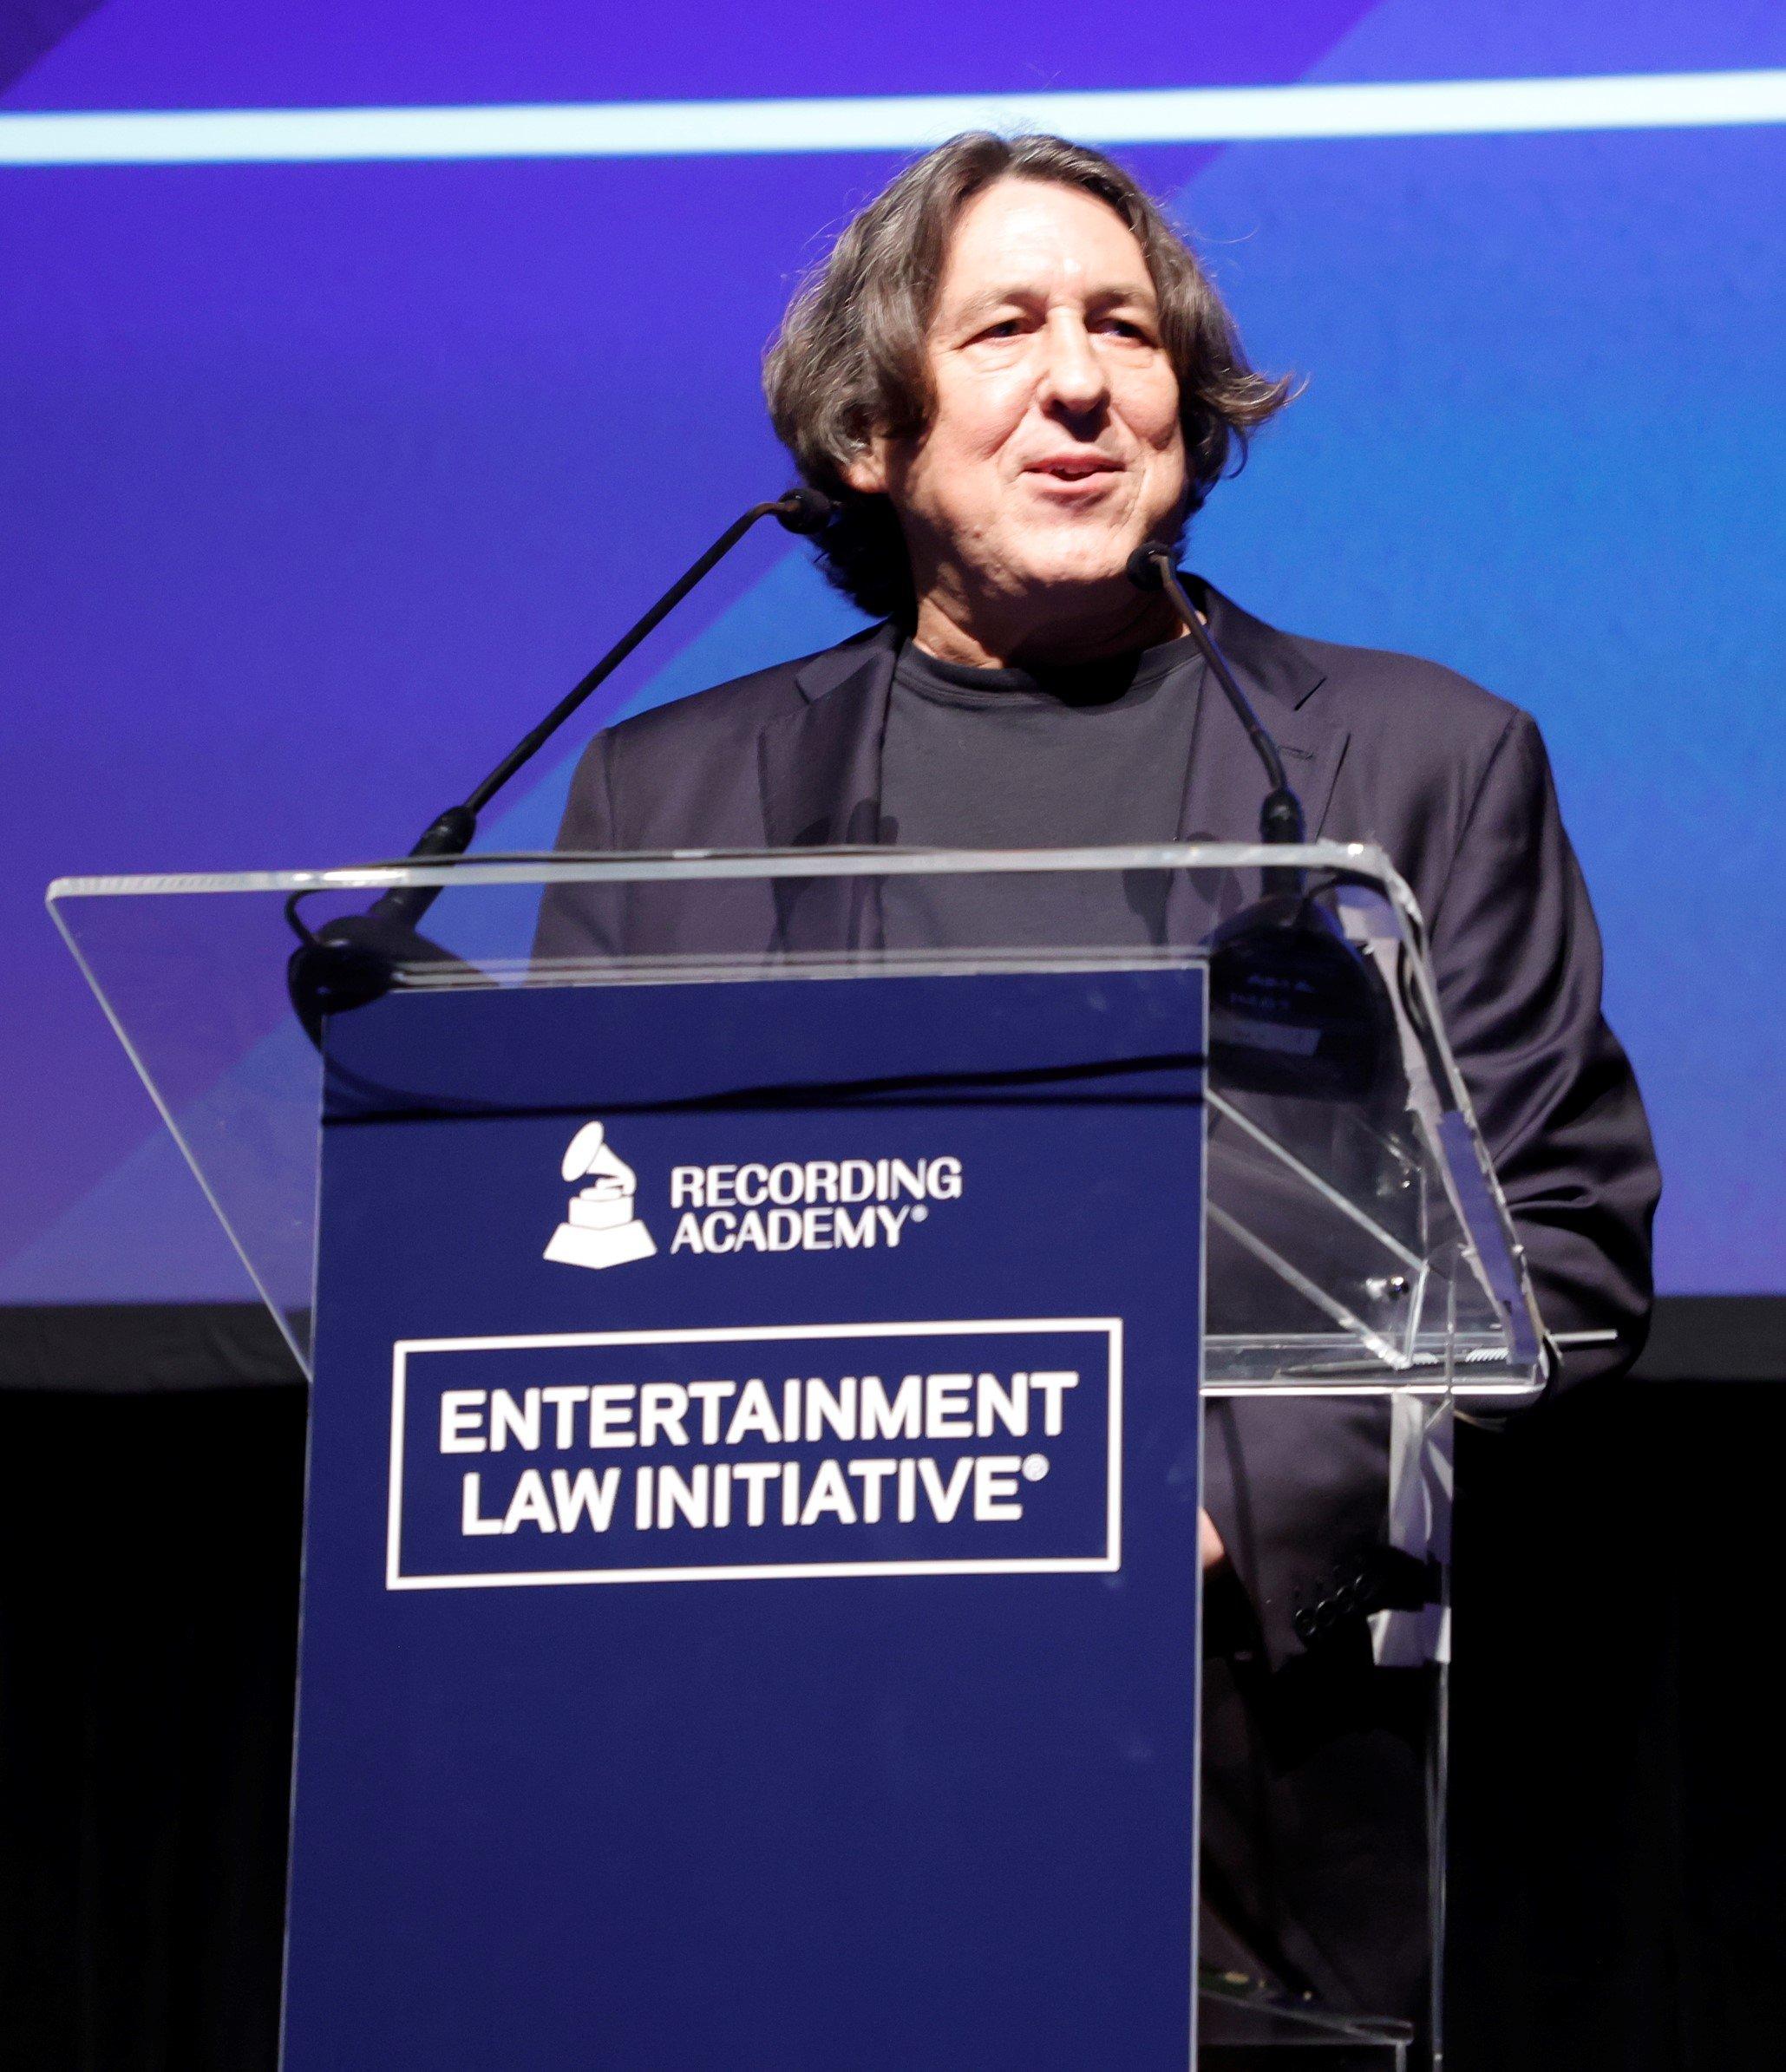 Cameron Crowe delivers keynote speech at the Recording Academy's 24th Annual Entertainment Law Initiative